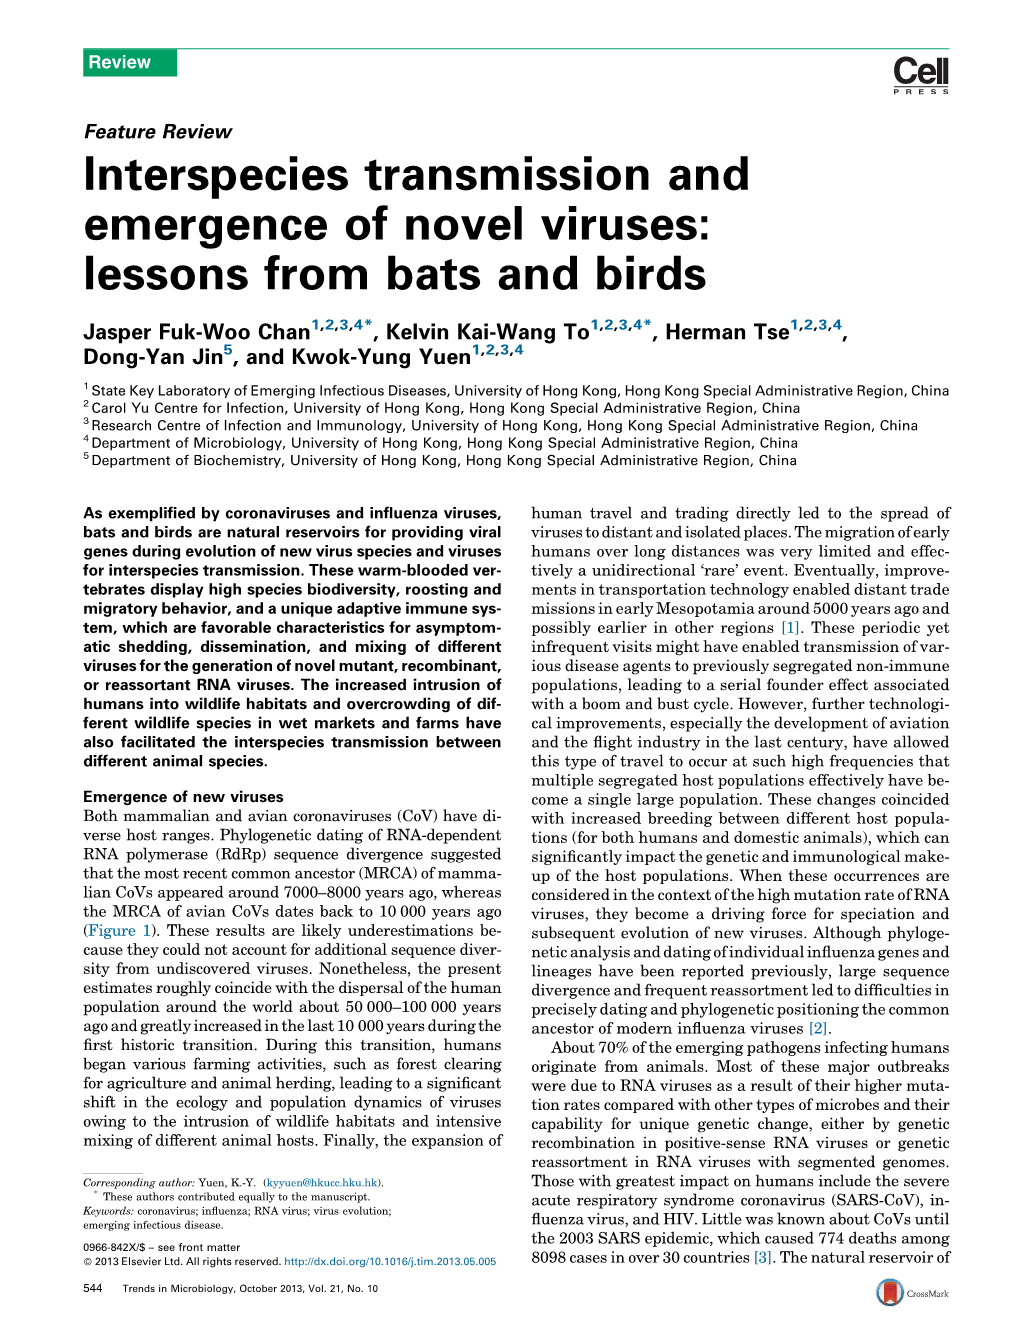 Interspecies Transmission and Emergence of Novel Viruses: Lessons from Bats and Birds